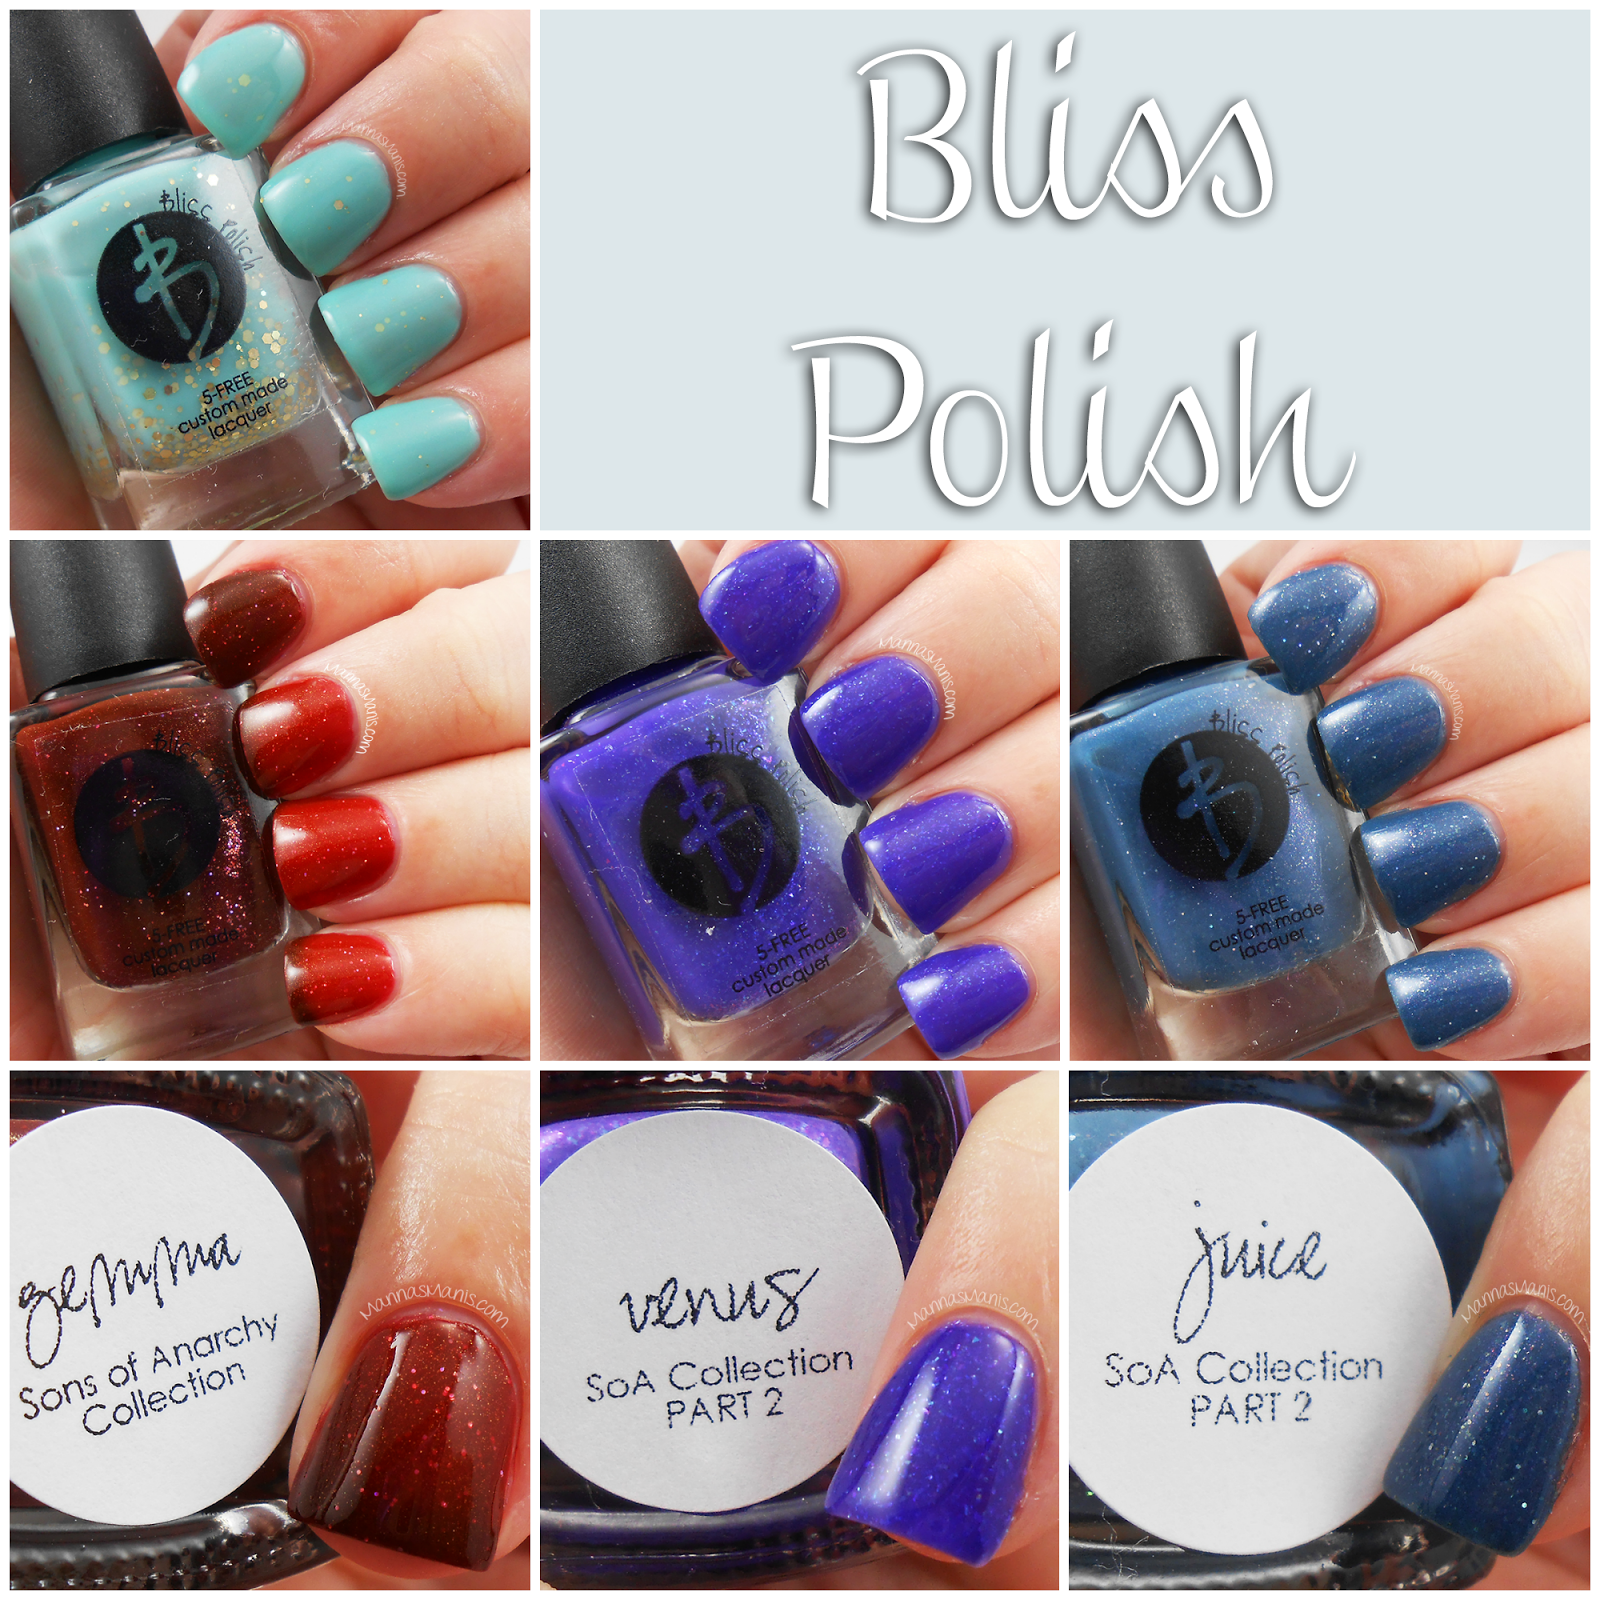 One of my favorite indie nail polishes, Bliss polish featuring swatches of Gemma, Juice, Venus, and Sweet Senti-mint